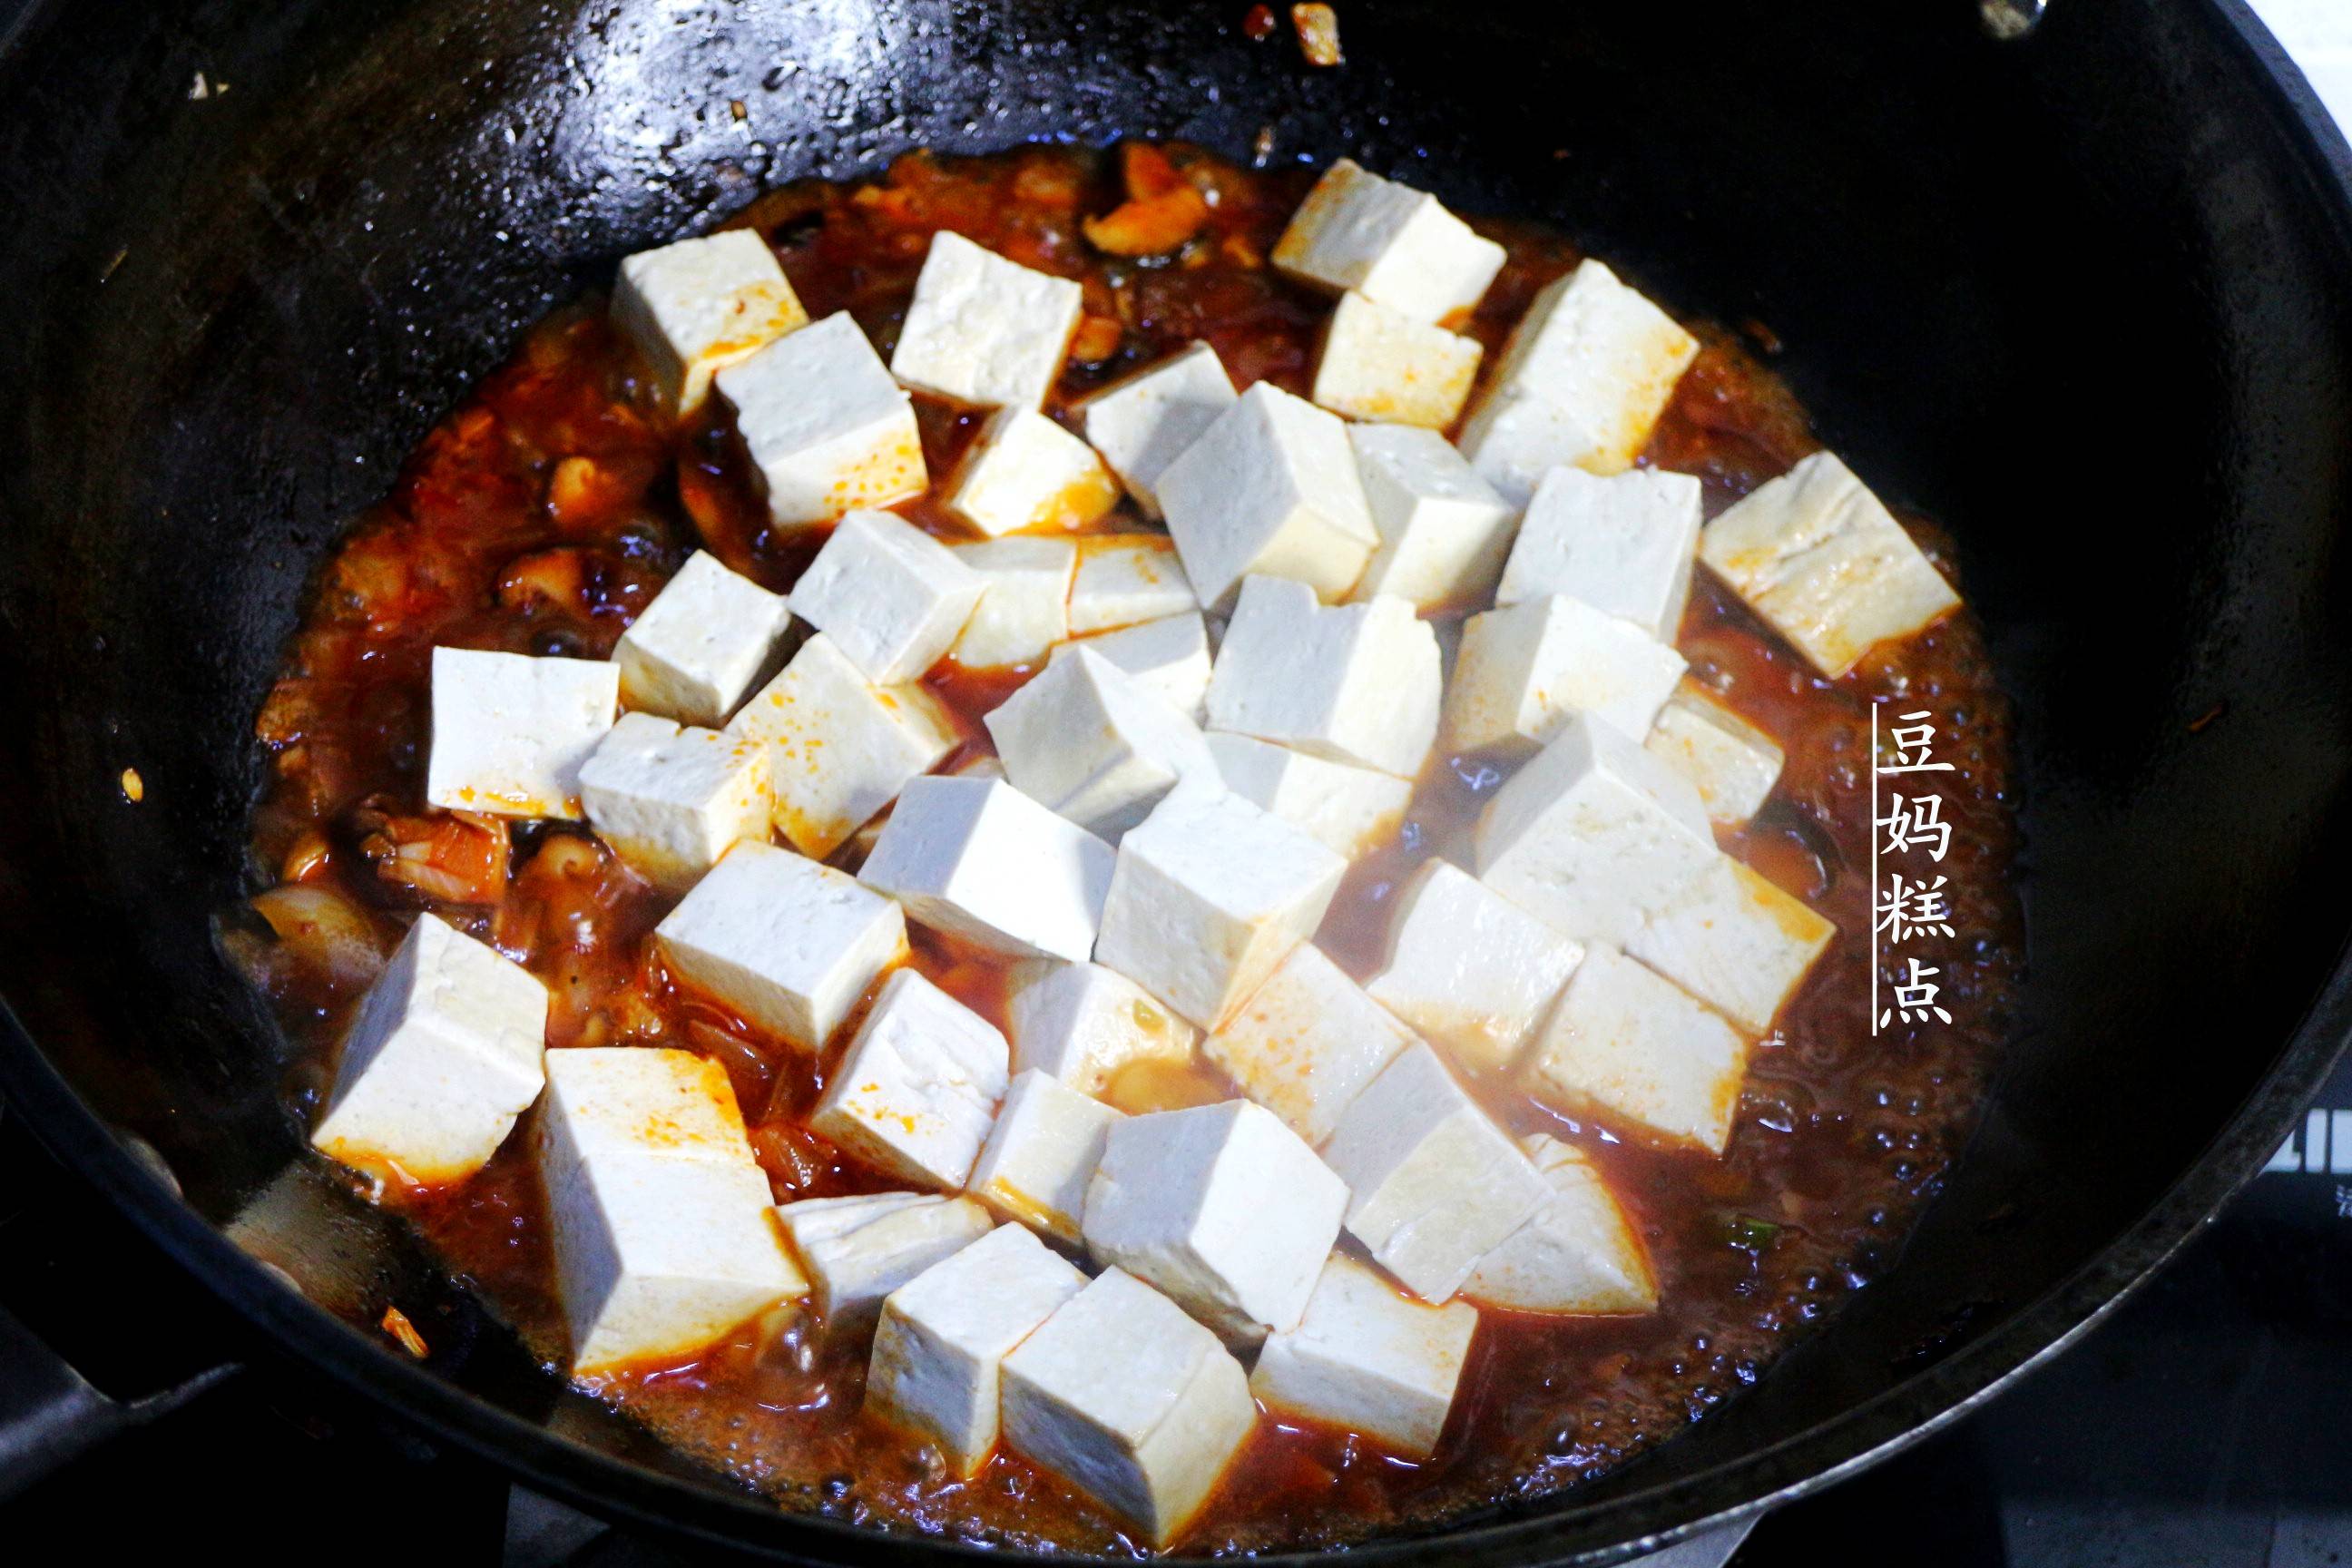 Asia food – Mapo tofu is original, vegan, simple, easy to use, want to eat 2 bowls without meat